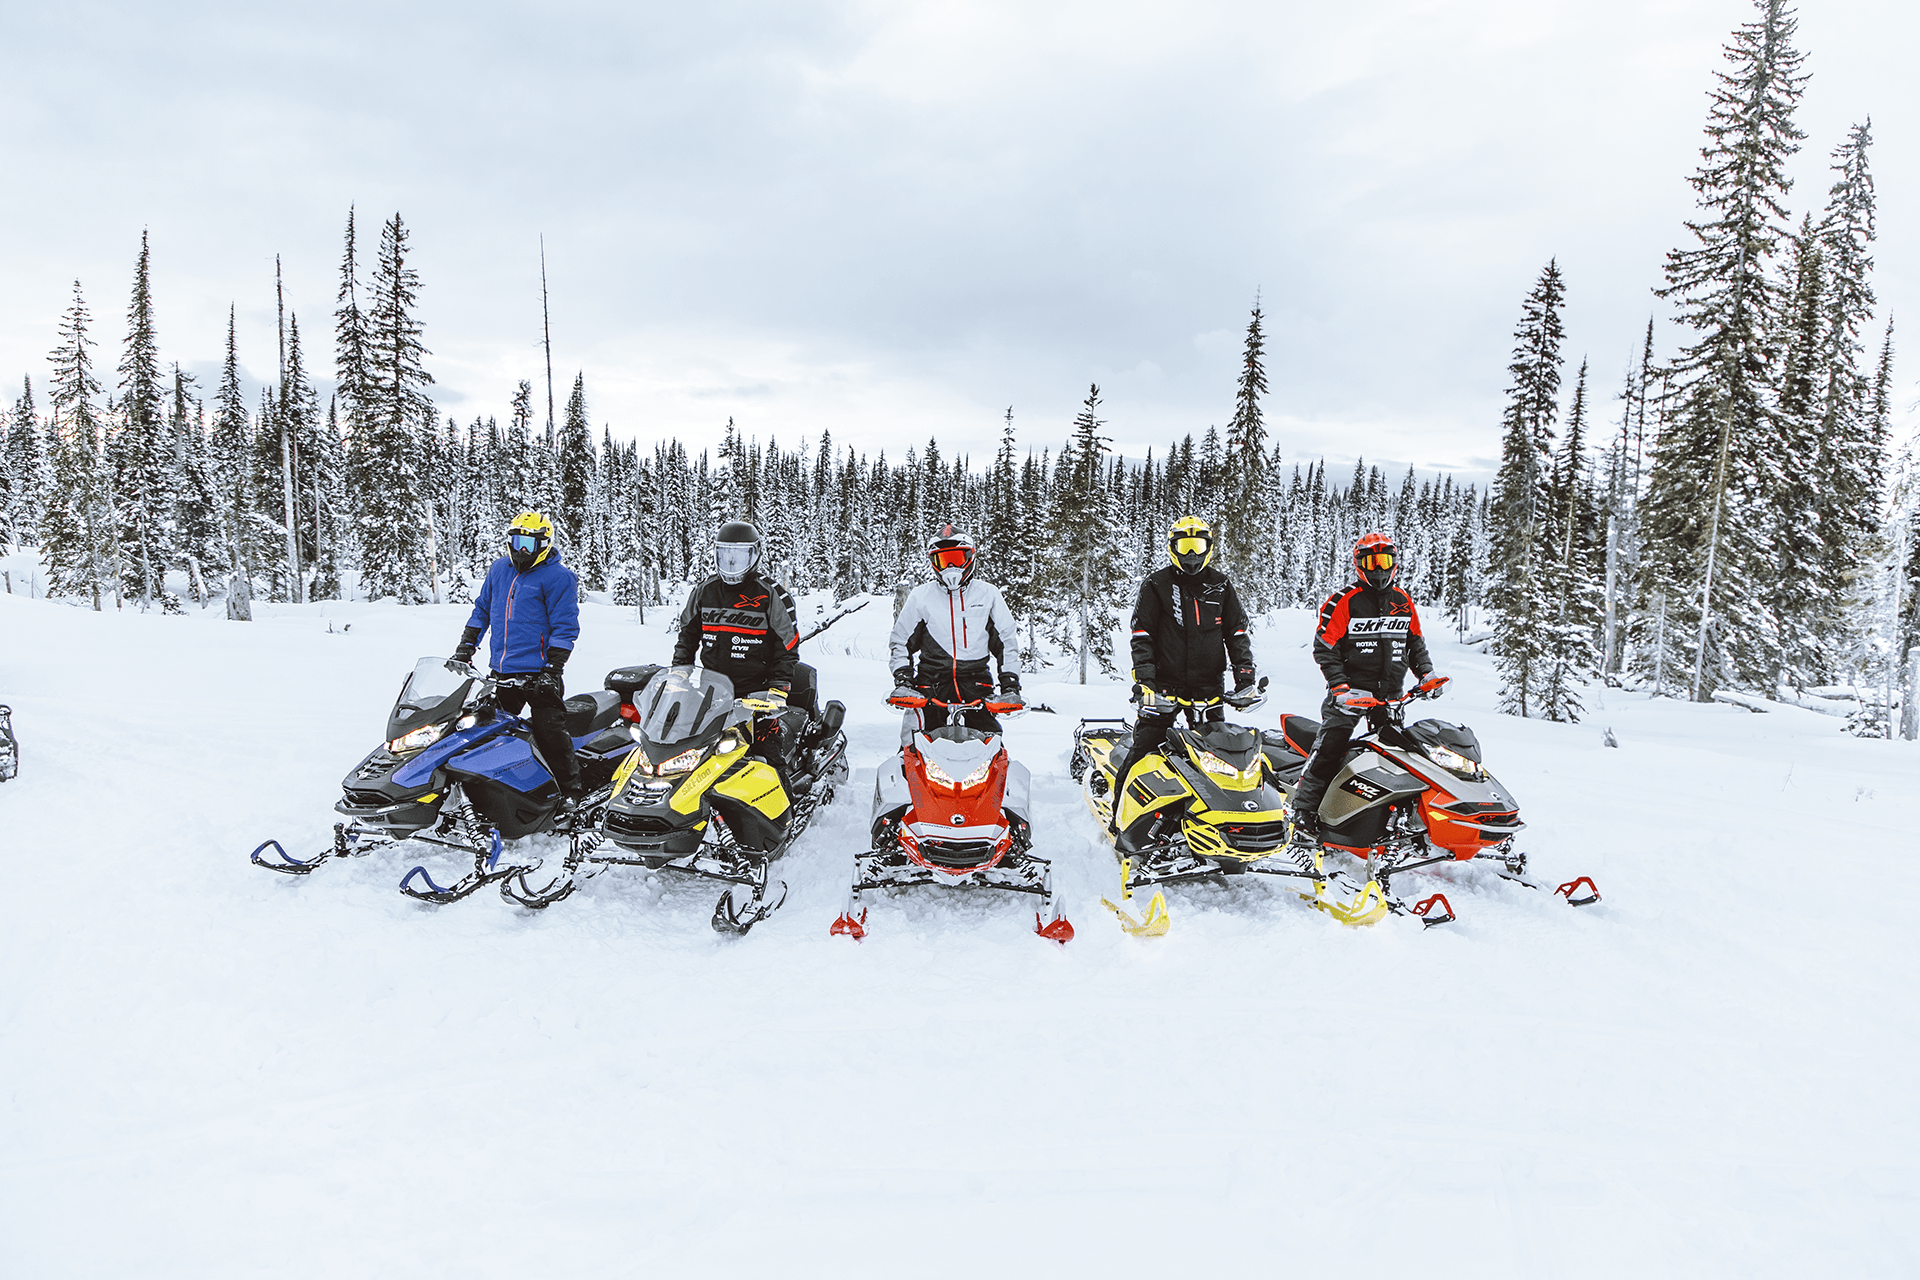 Group on snowmobiles posing for a photo